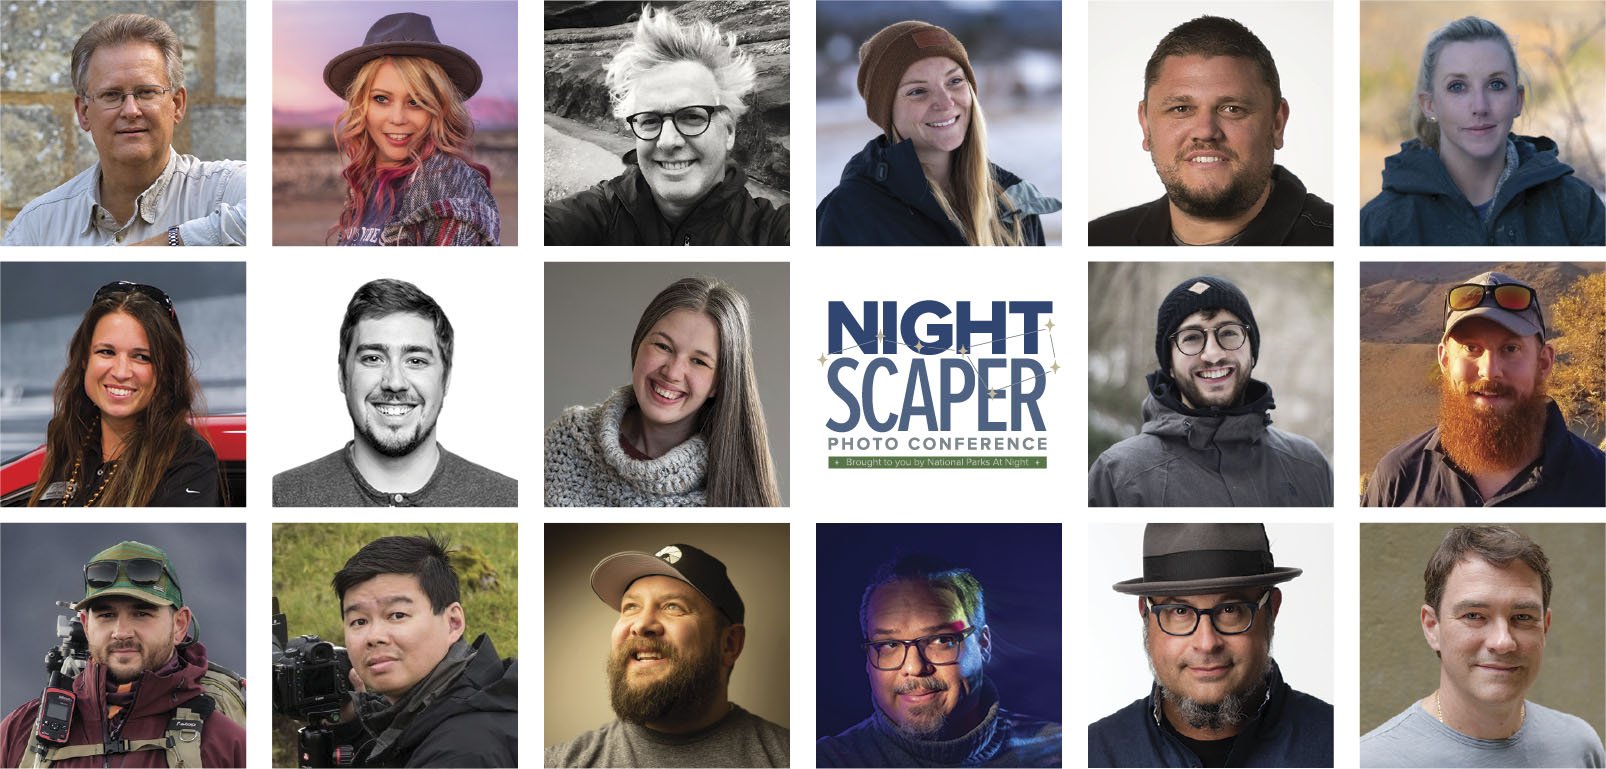 Aaron King to host weekly pre-conference livestreams with Nightscaper  speakers — Nightscaper Photo Conference